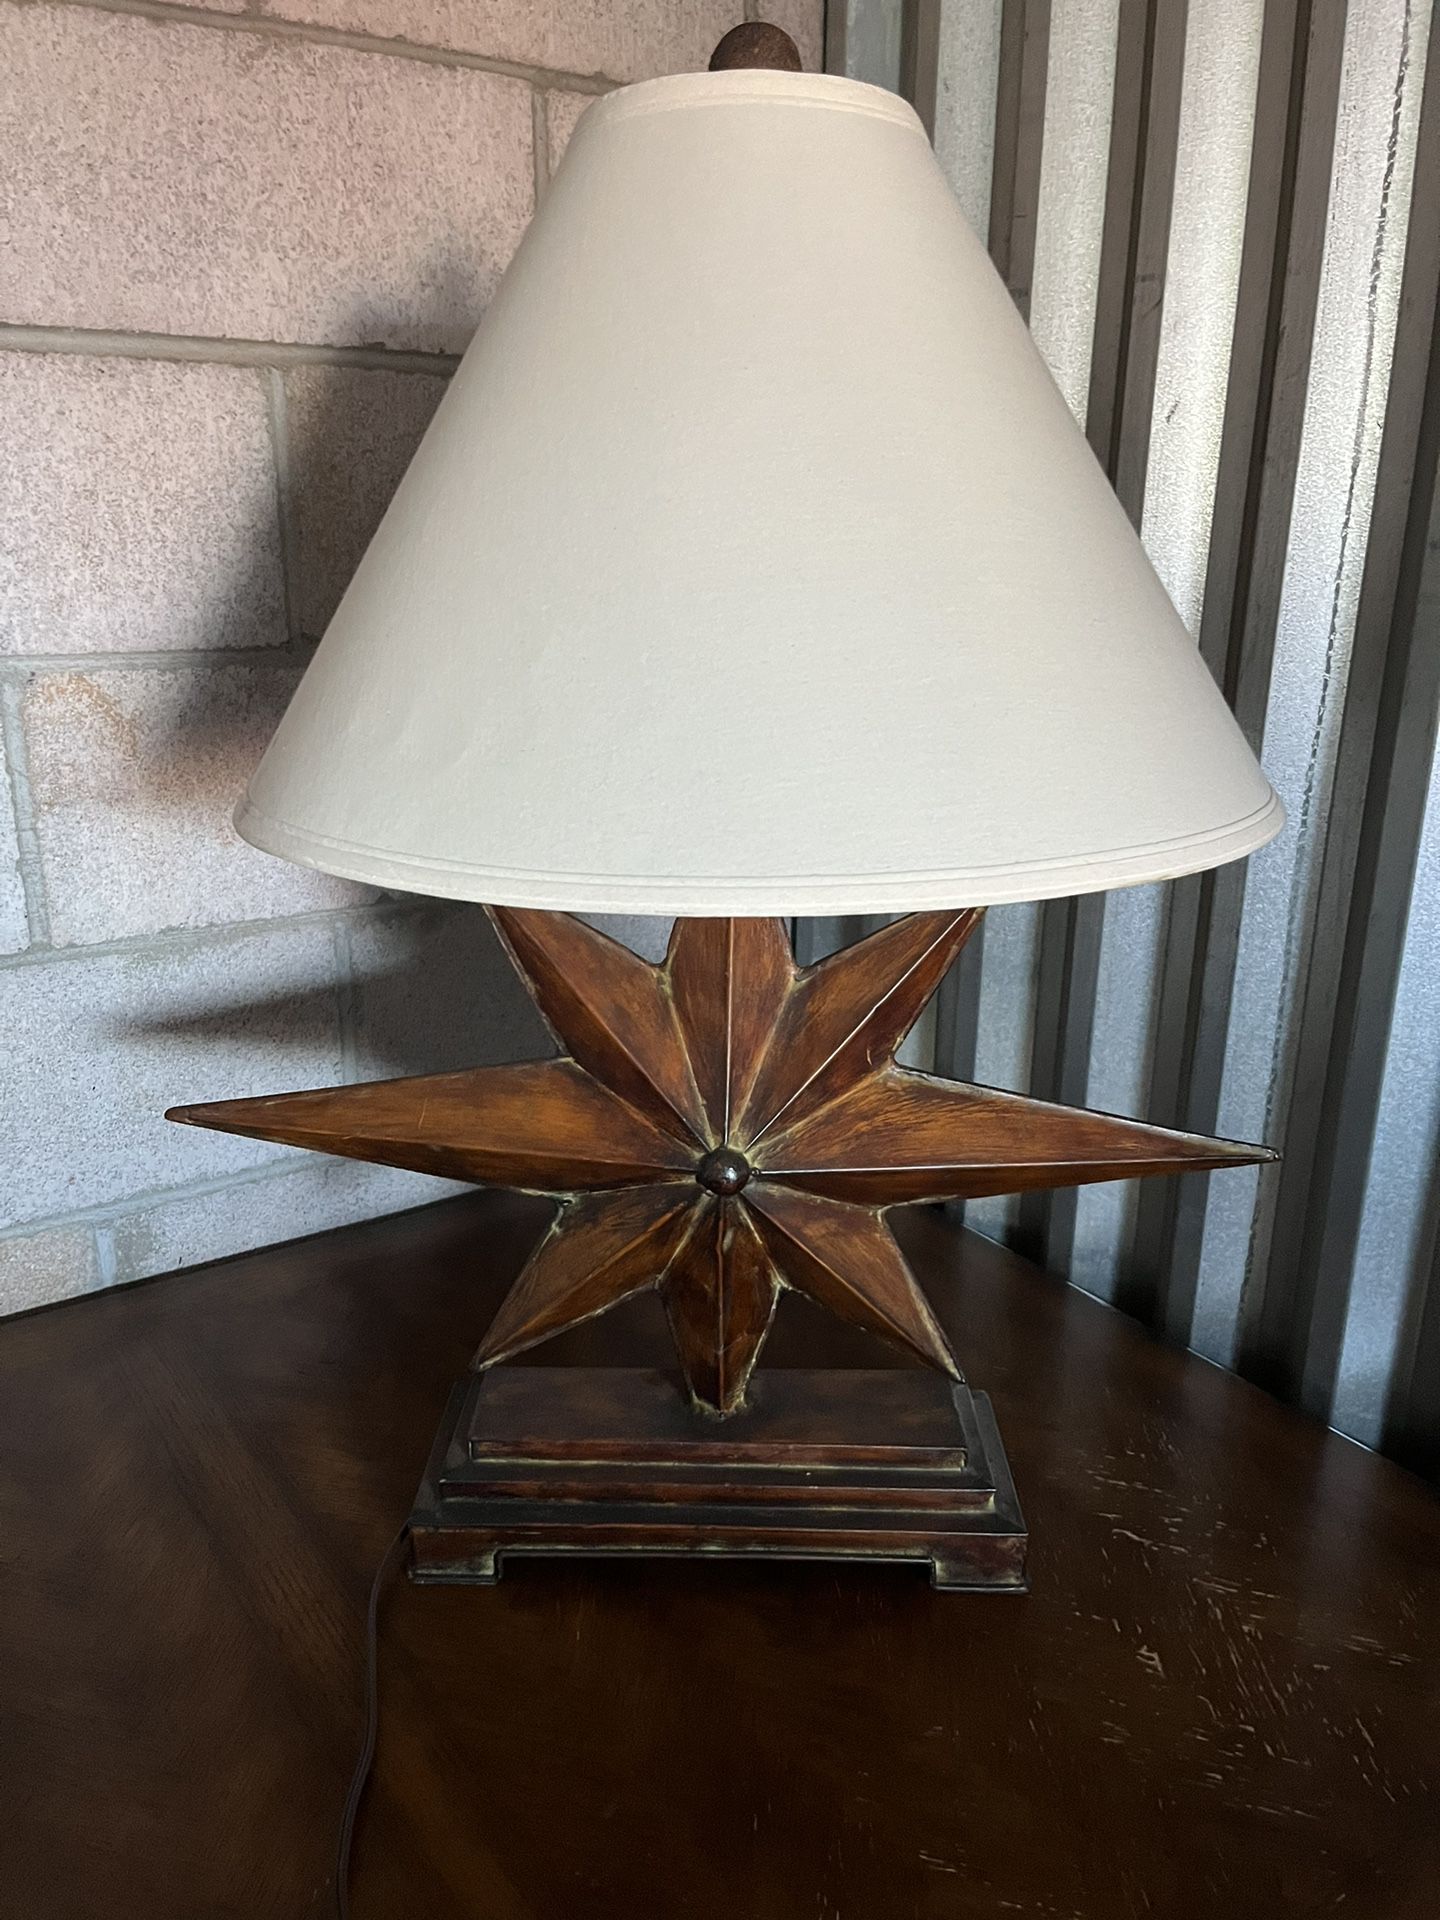 This regent style table lamp features and 8-point star shaped base and contrasting soft back shade.  Product Features : Regent style Materials: Iron, 